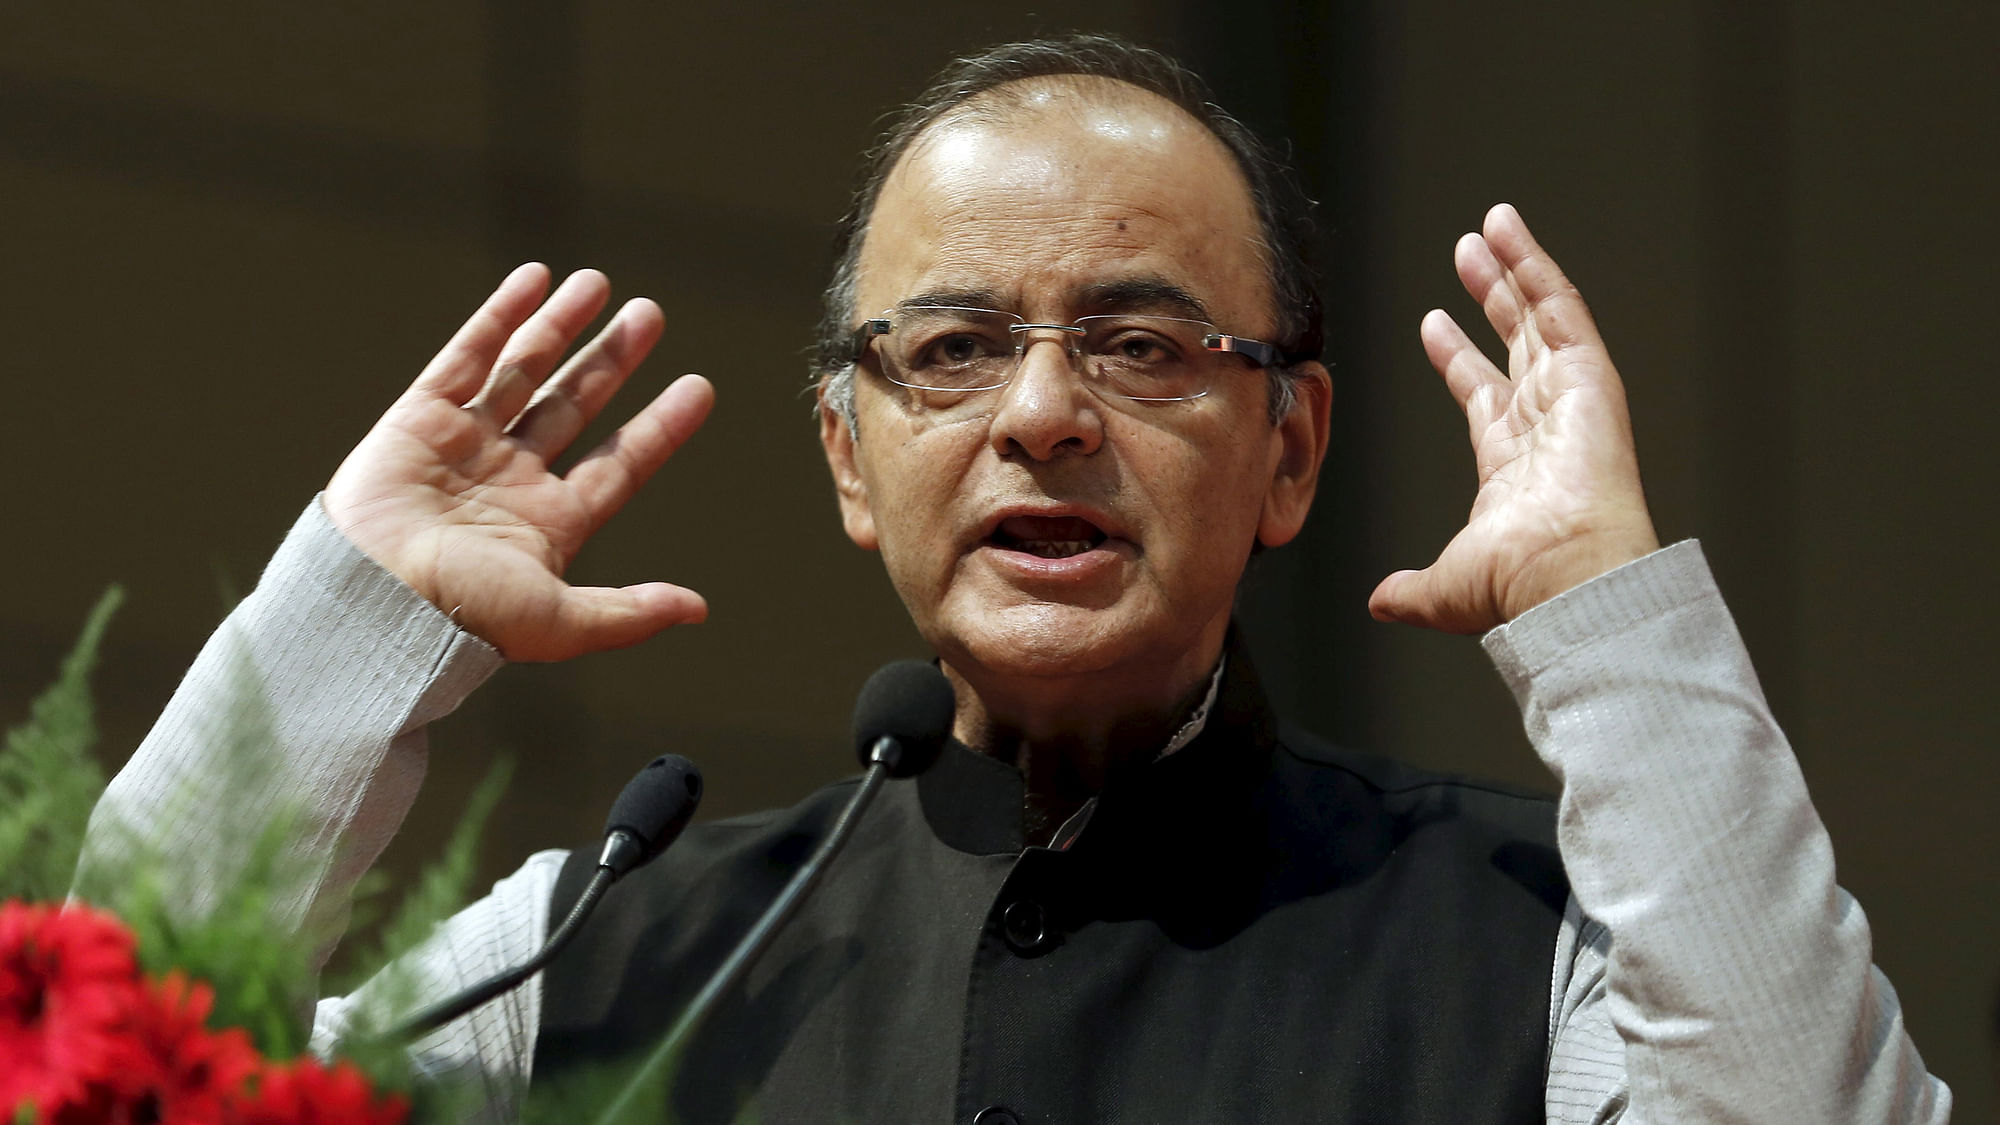 In an address on Saturday, Finance Minister Arun Jaitley questioned the Nehruvian model. (Photo: Reuters)